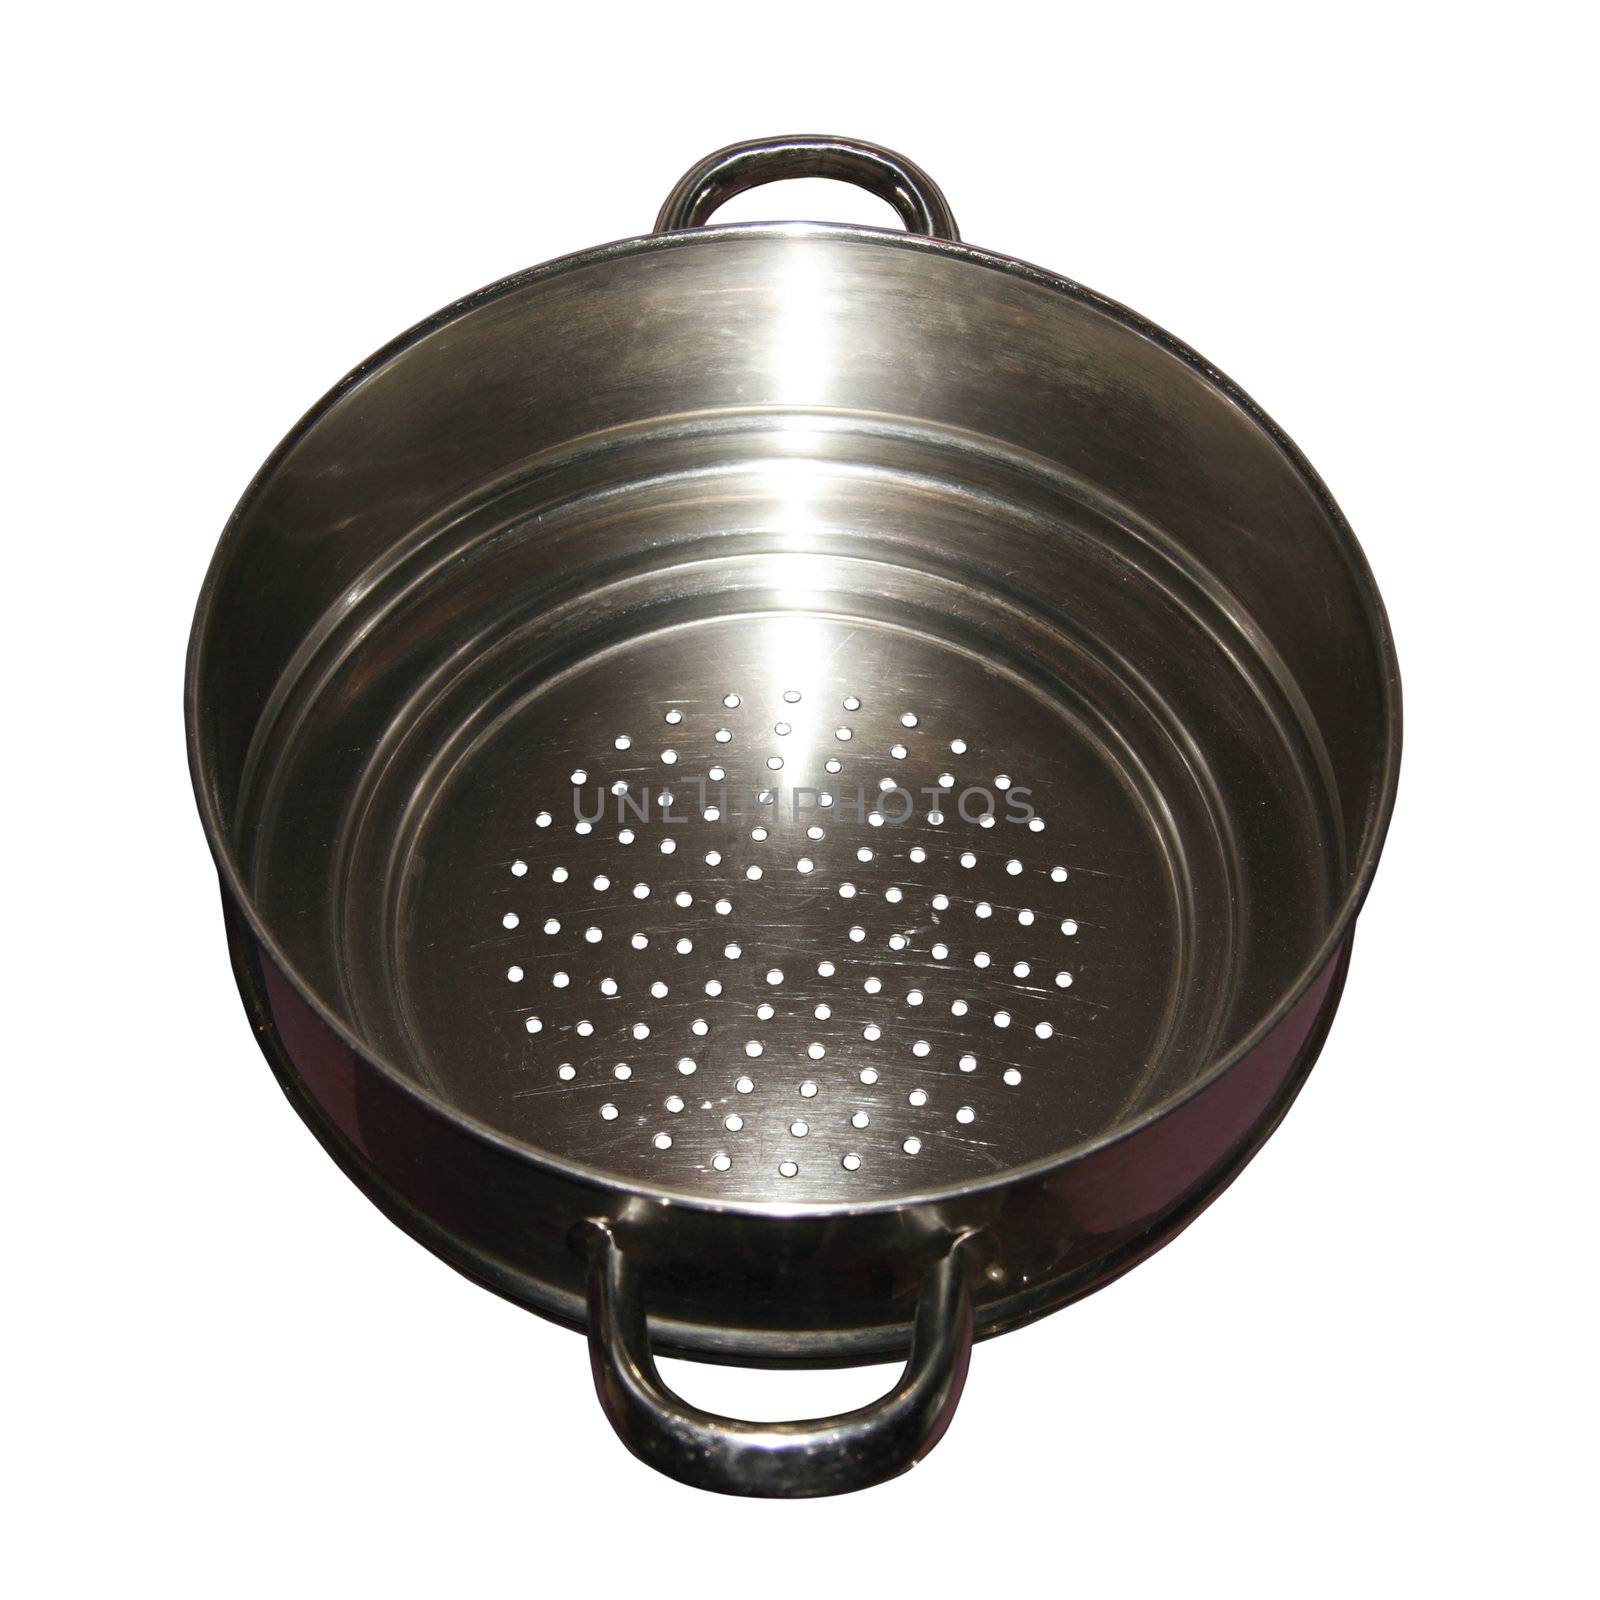 colander by morrbyte